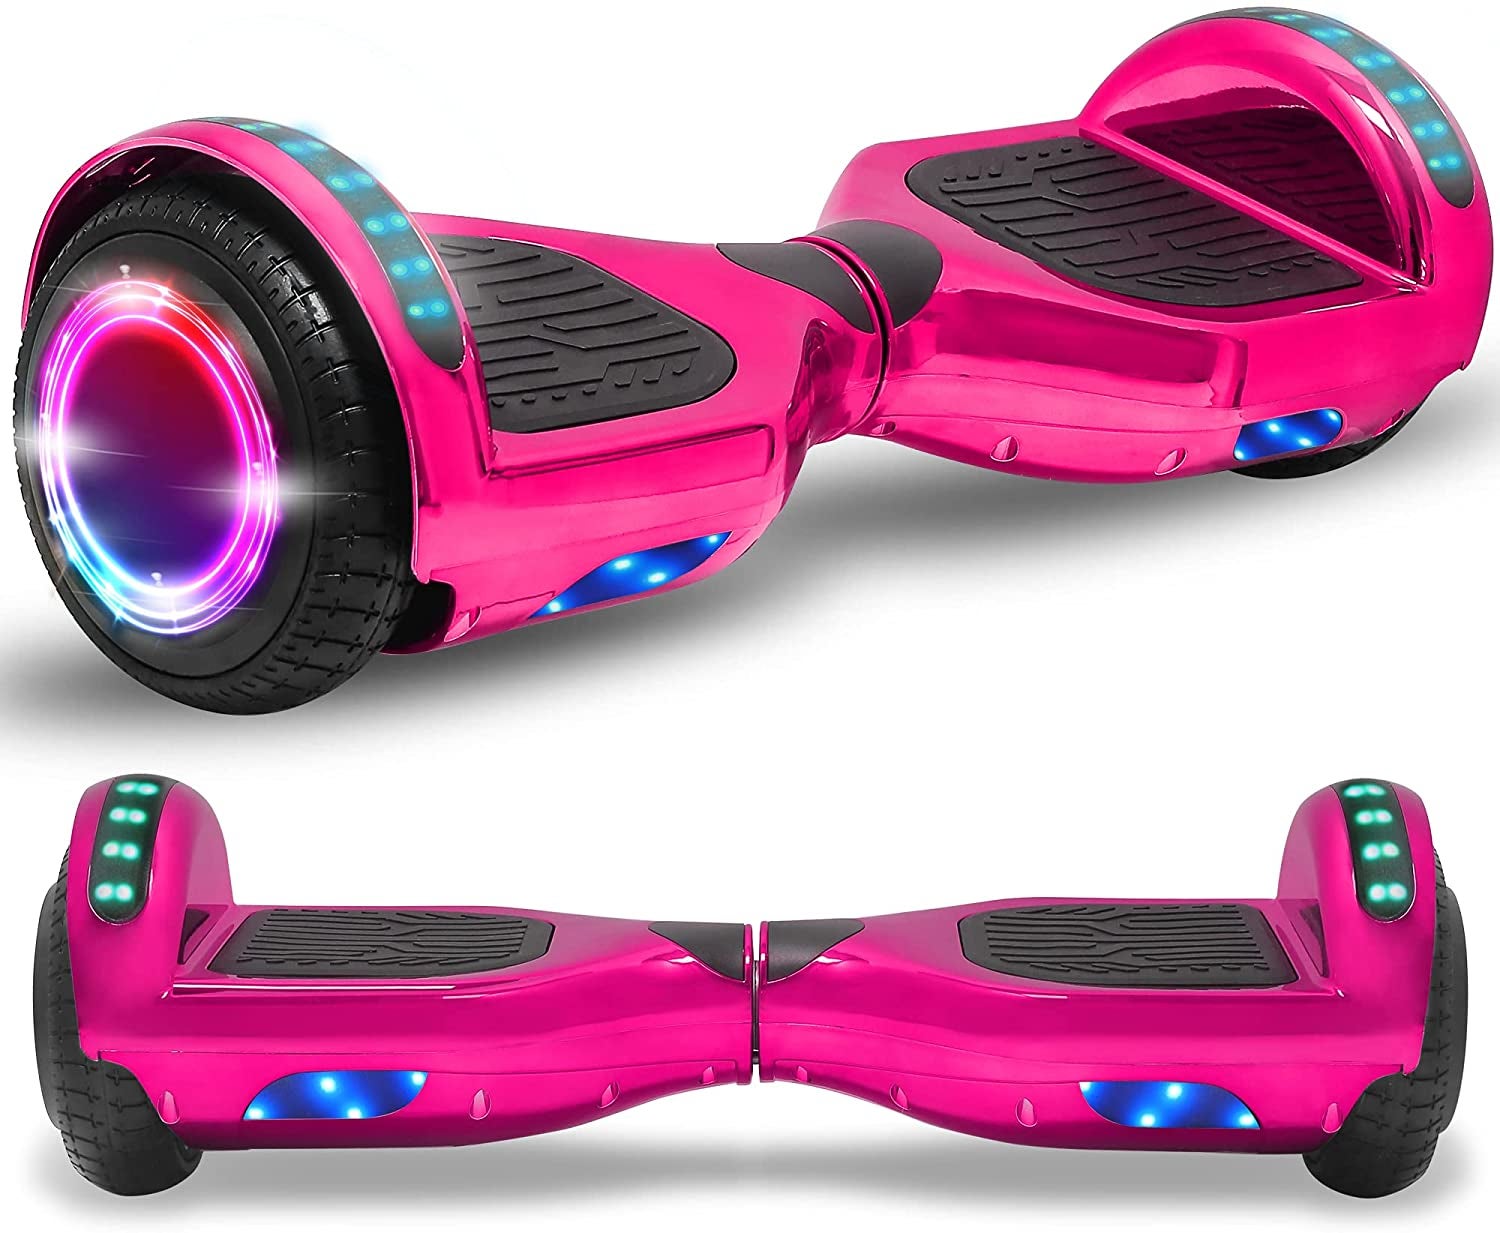 Hot pink hoverboard with light up sides side-view and front-view